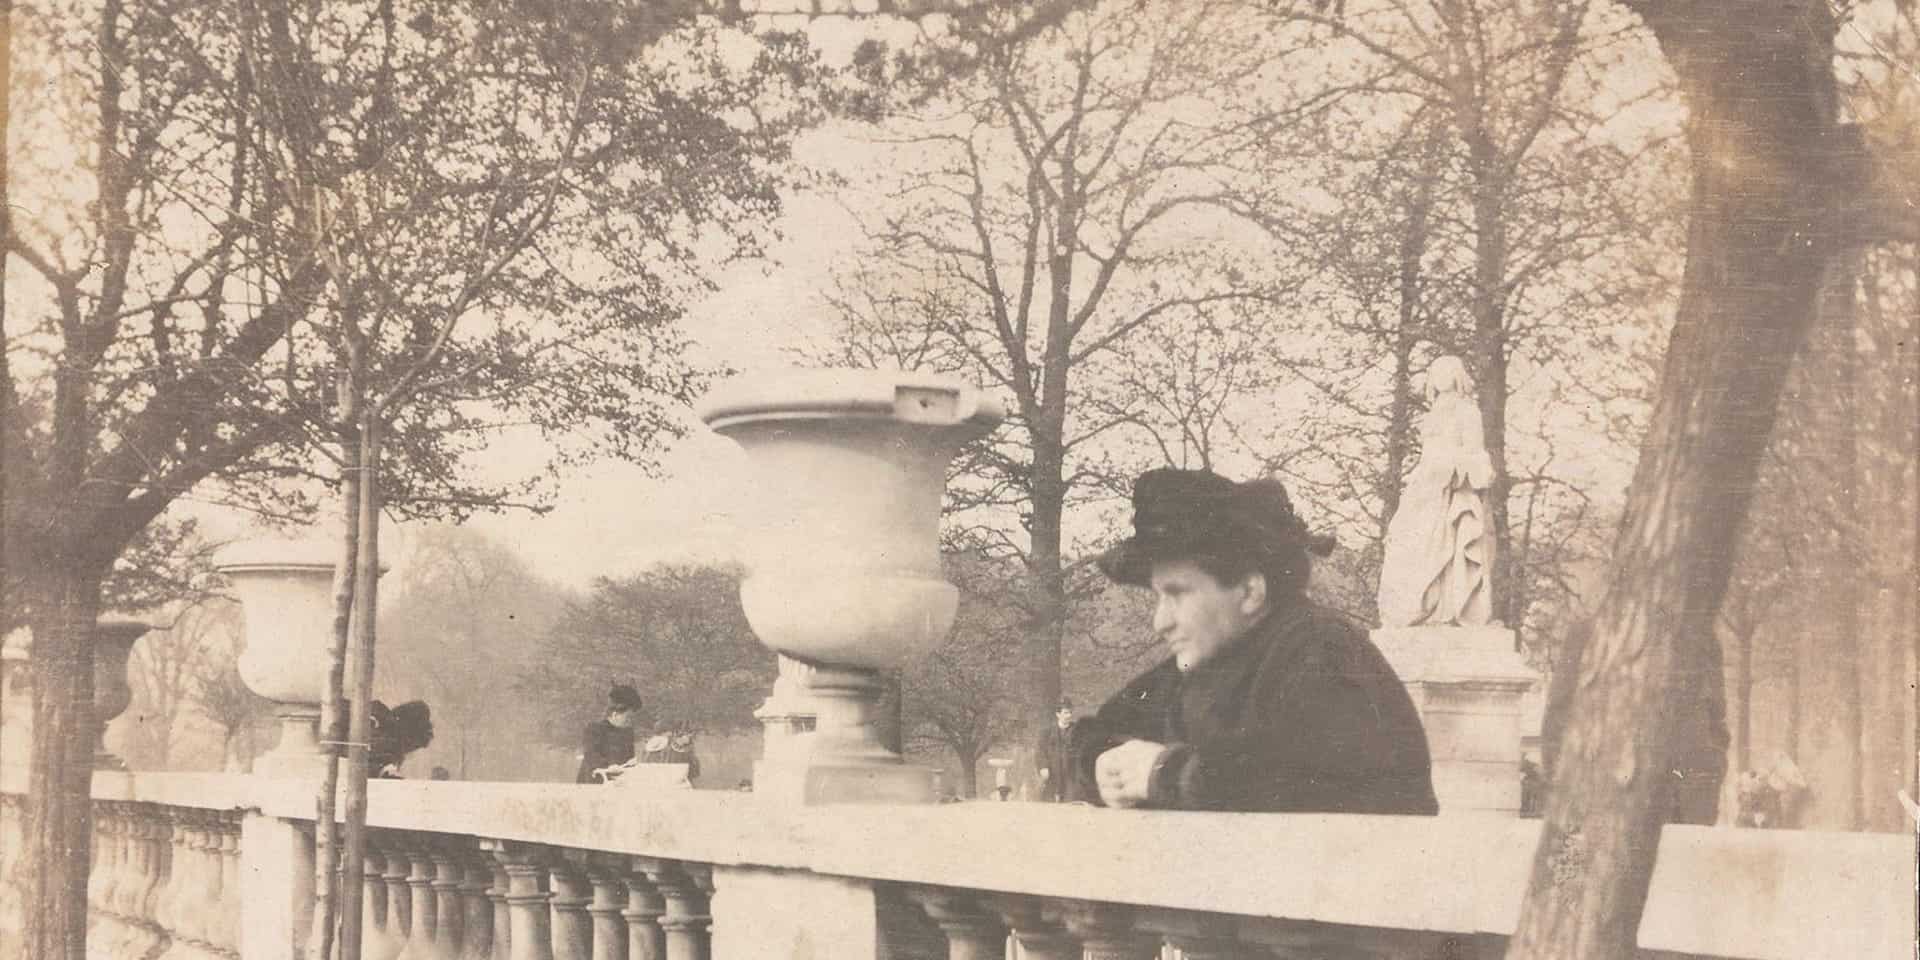 Gertrude Stein in 1905 in the Jardins du Luxembourg dressed in black, with a black hat, looking over a bridge.